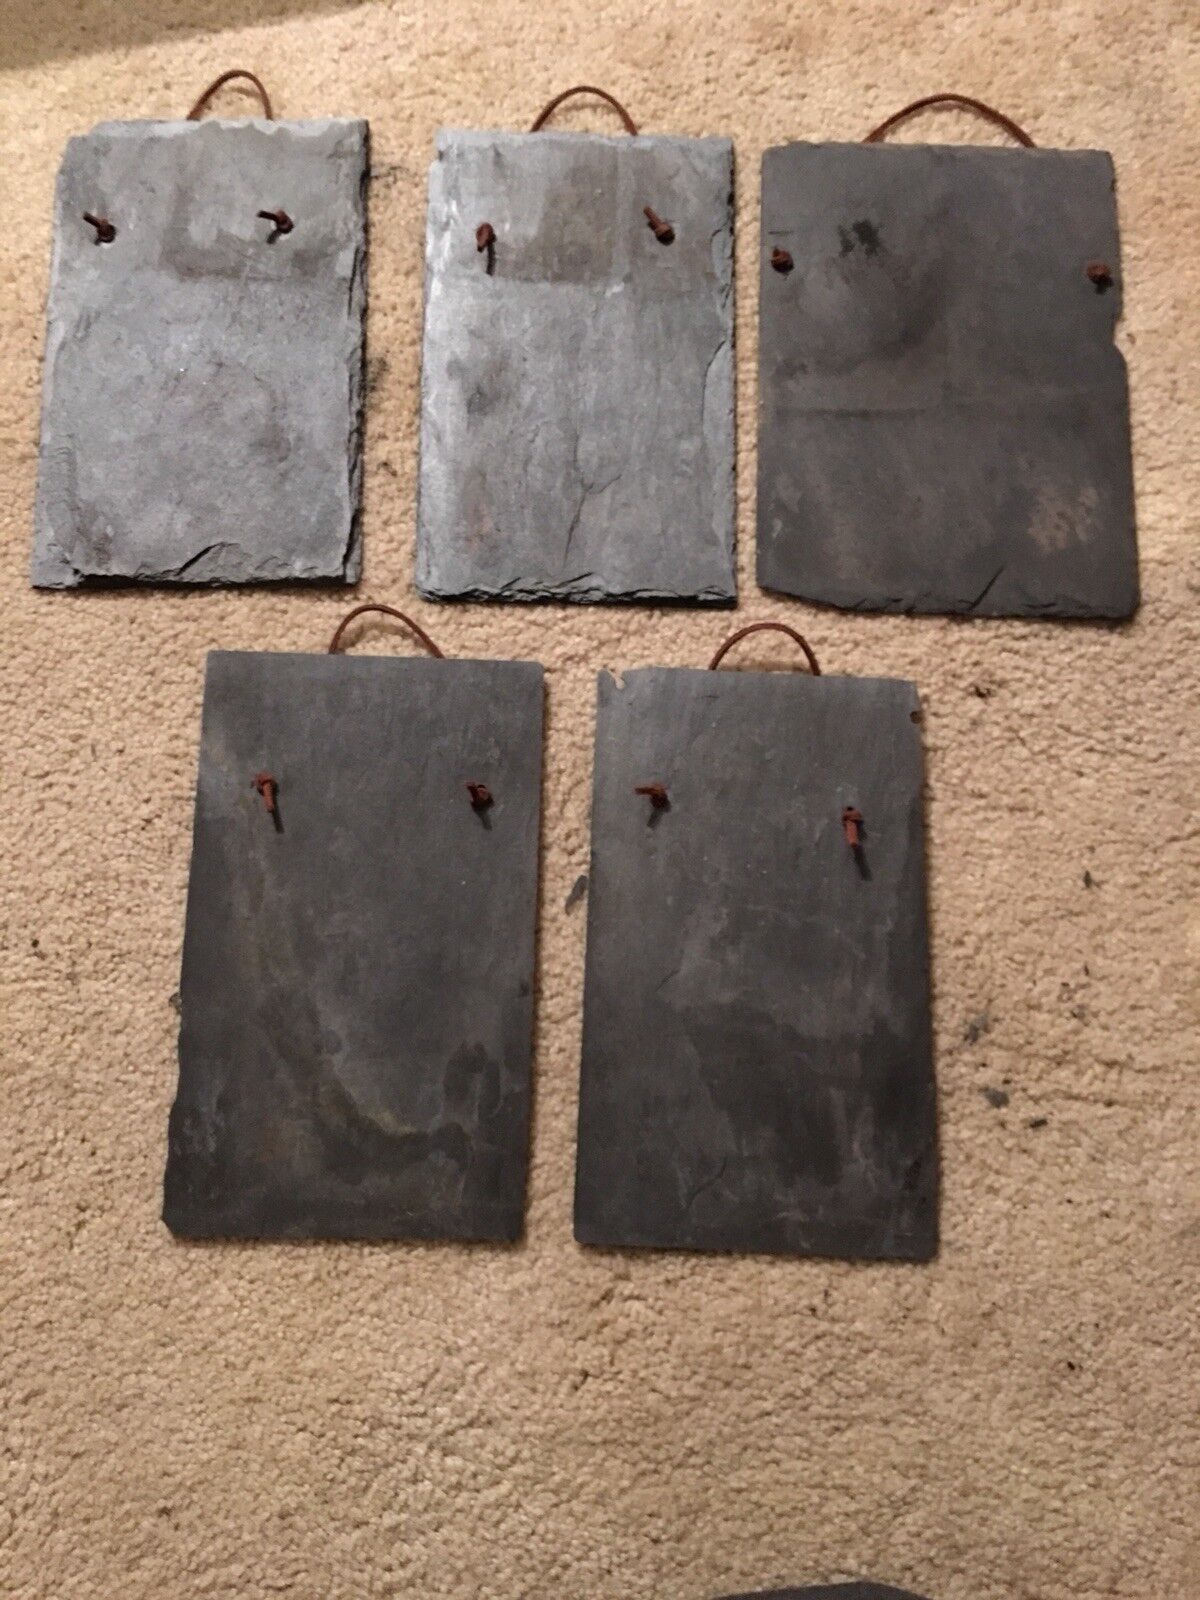 slate roof New Orleans Mall shingles for crafts San Antonio Mall Hanger With Leather pcs 15